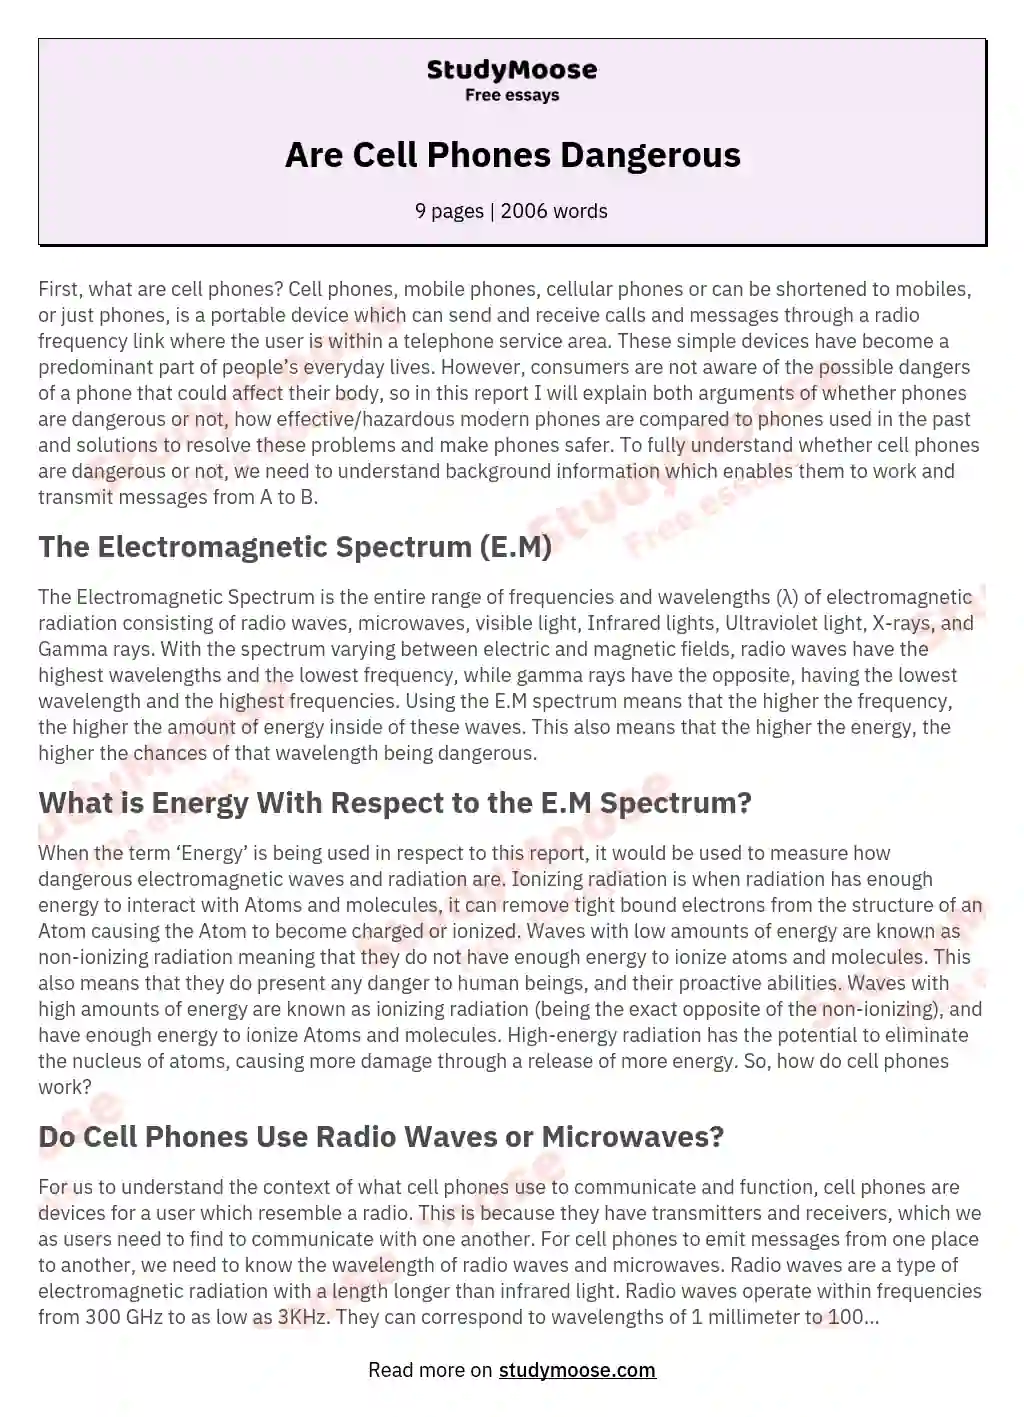 essay on cell phone radiation is dangerous and should be limited